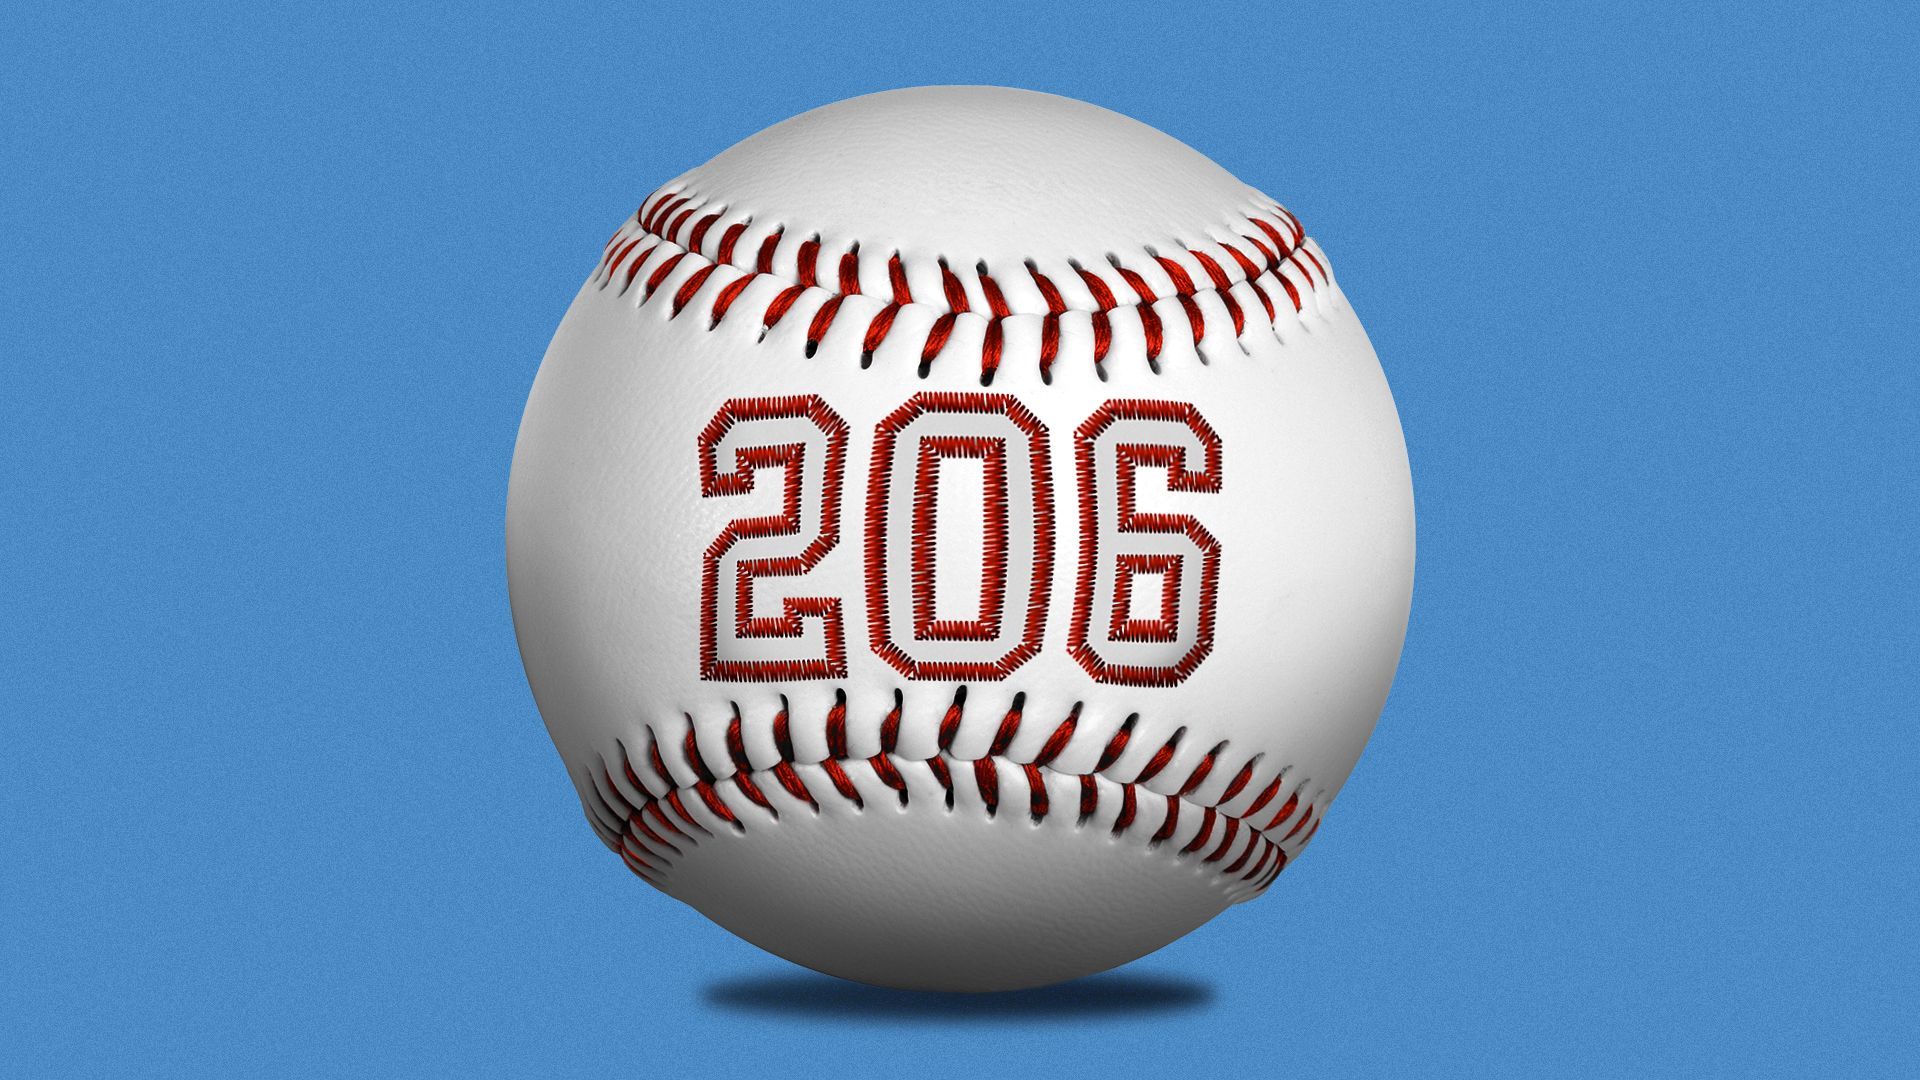 Illustration of the "206" area code embroidered on a baseball.